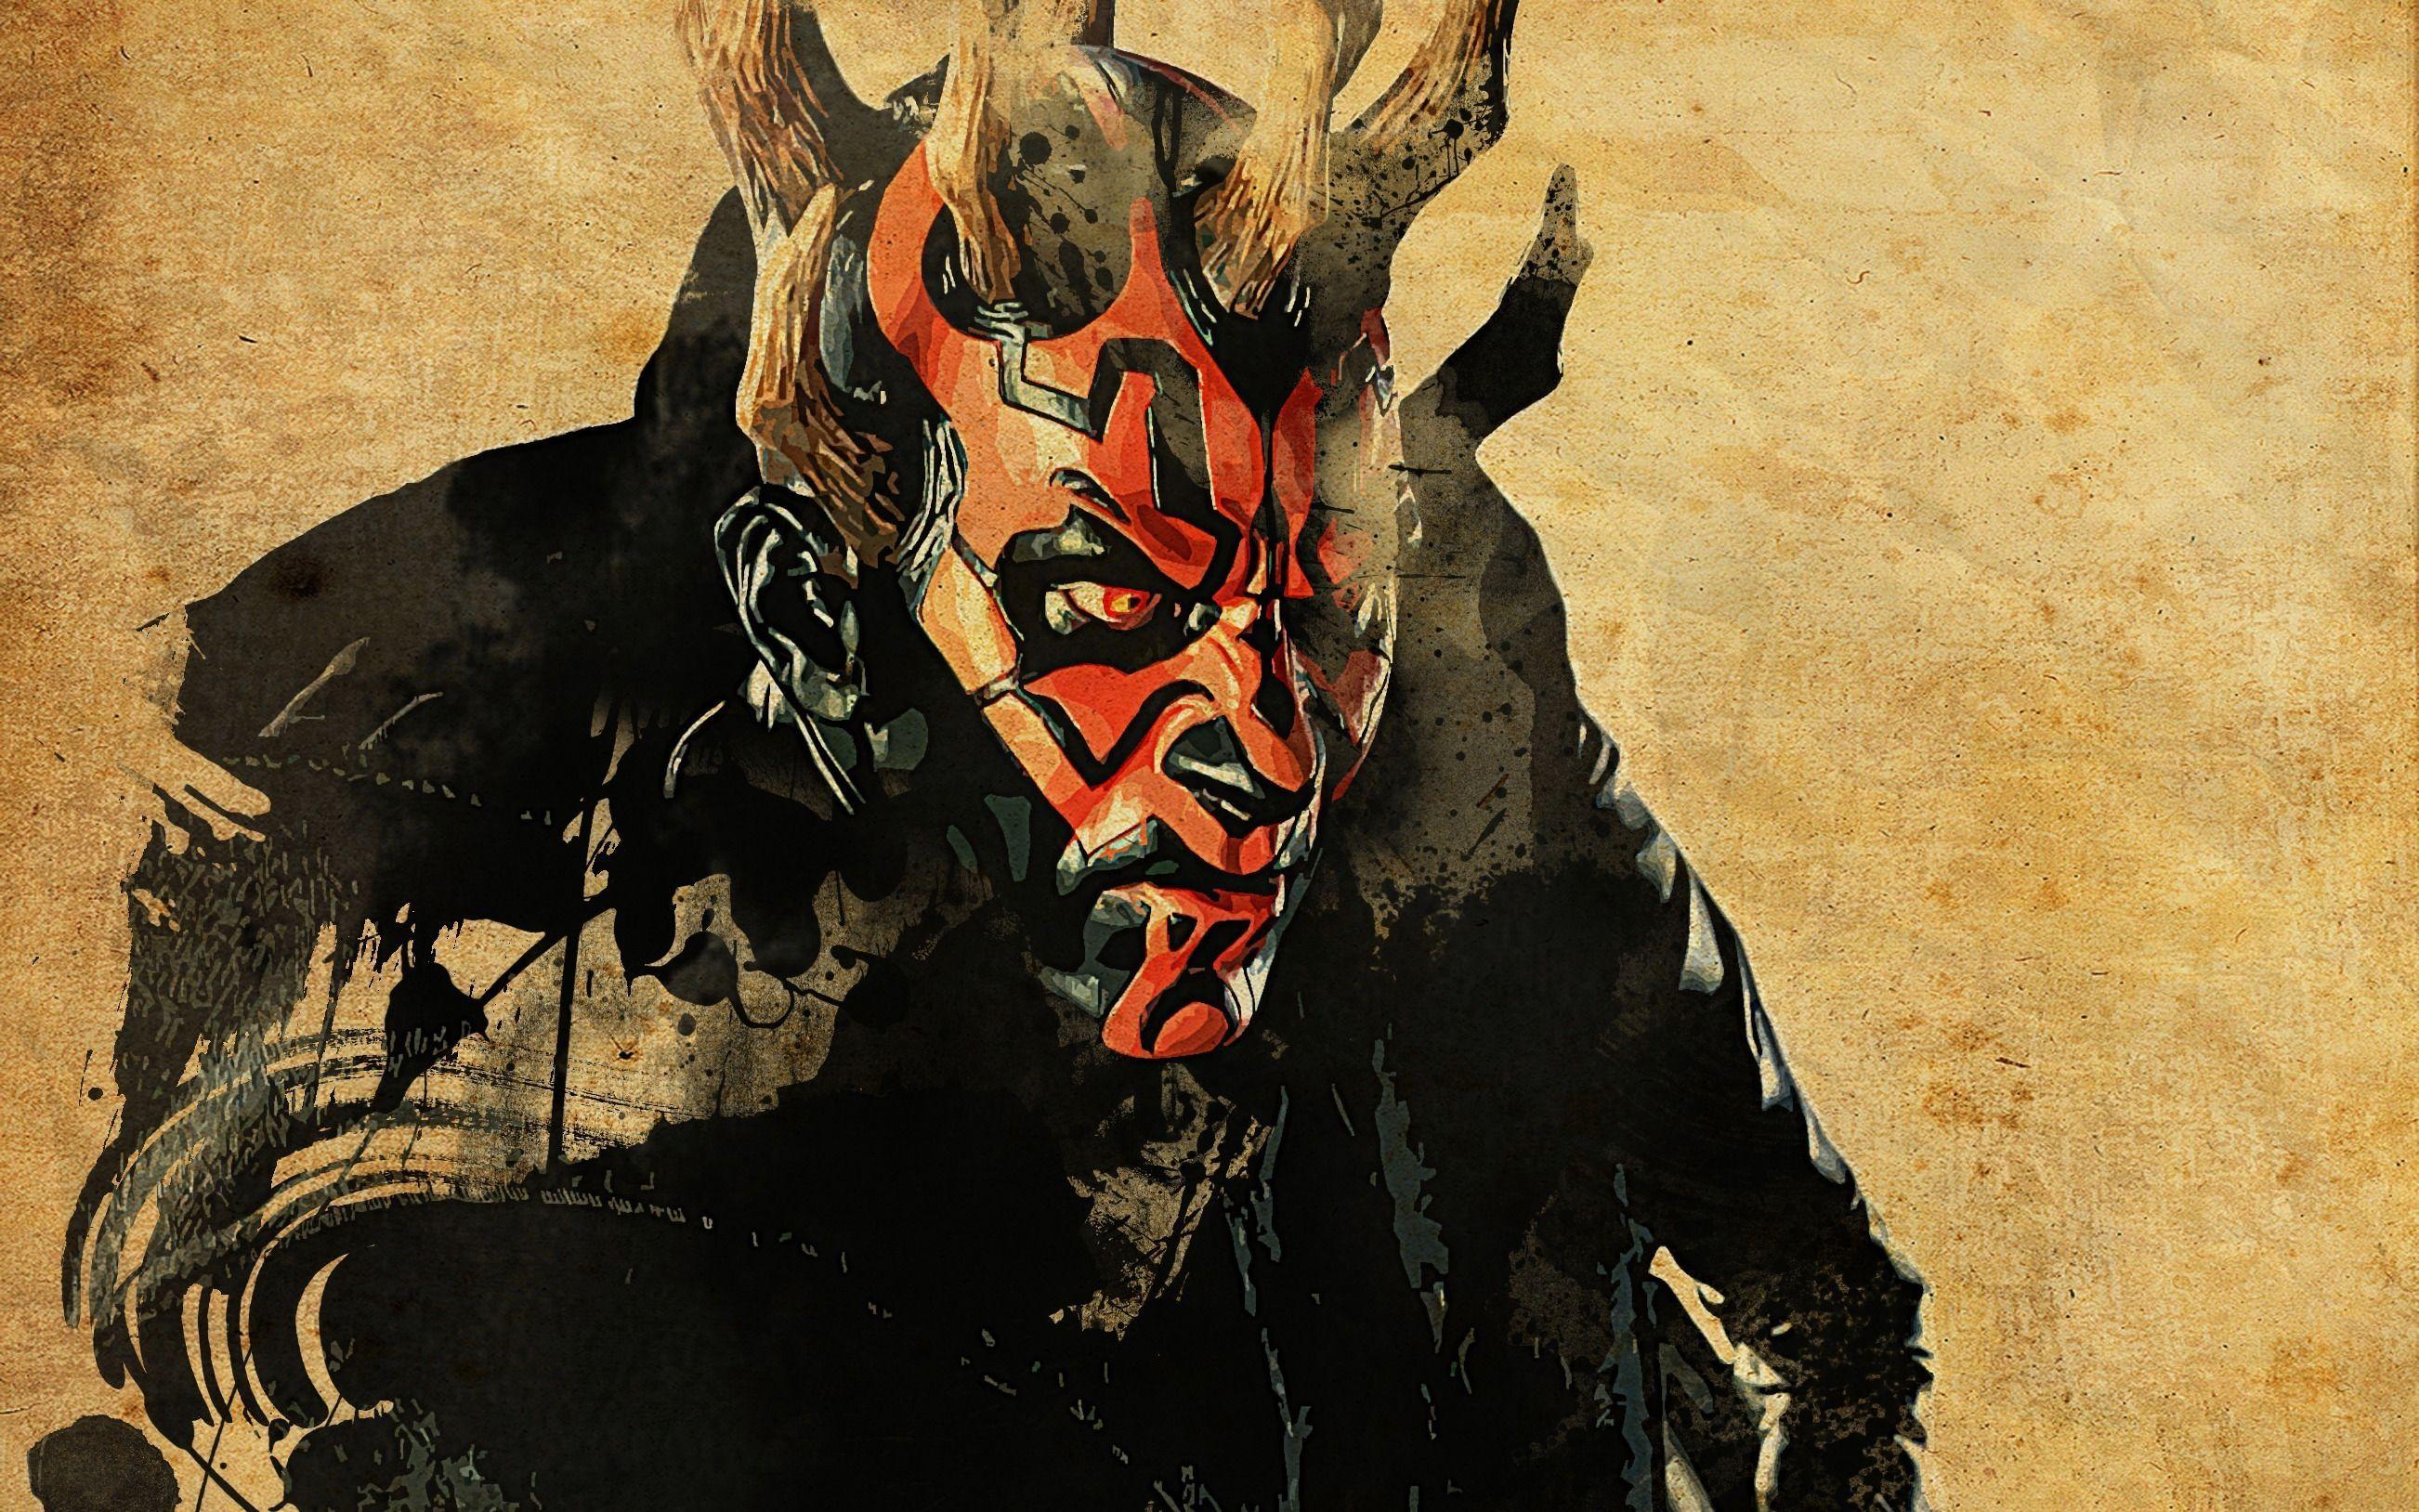 Darth Maul, a deadly agile Sith Lord trained by the evil Darth